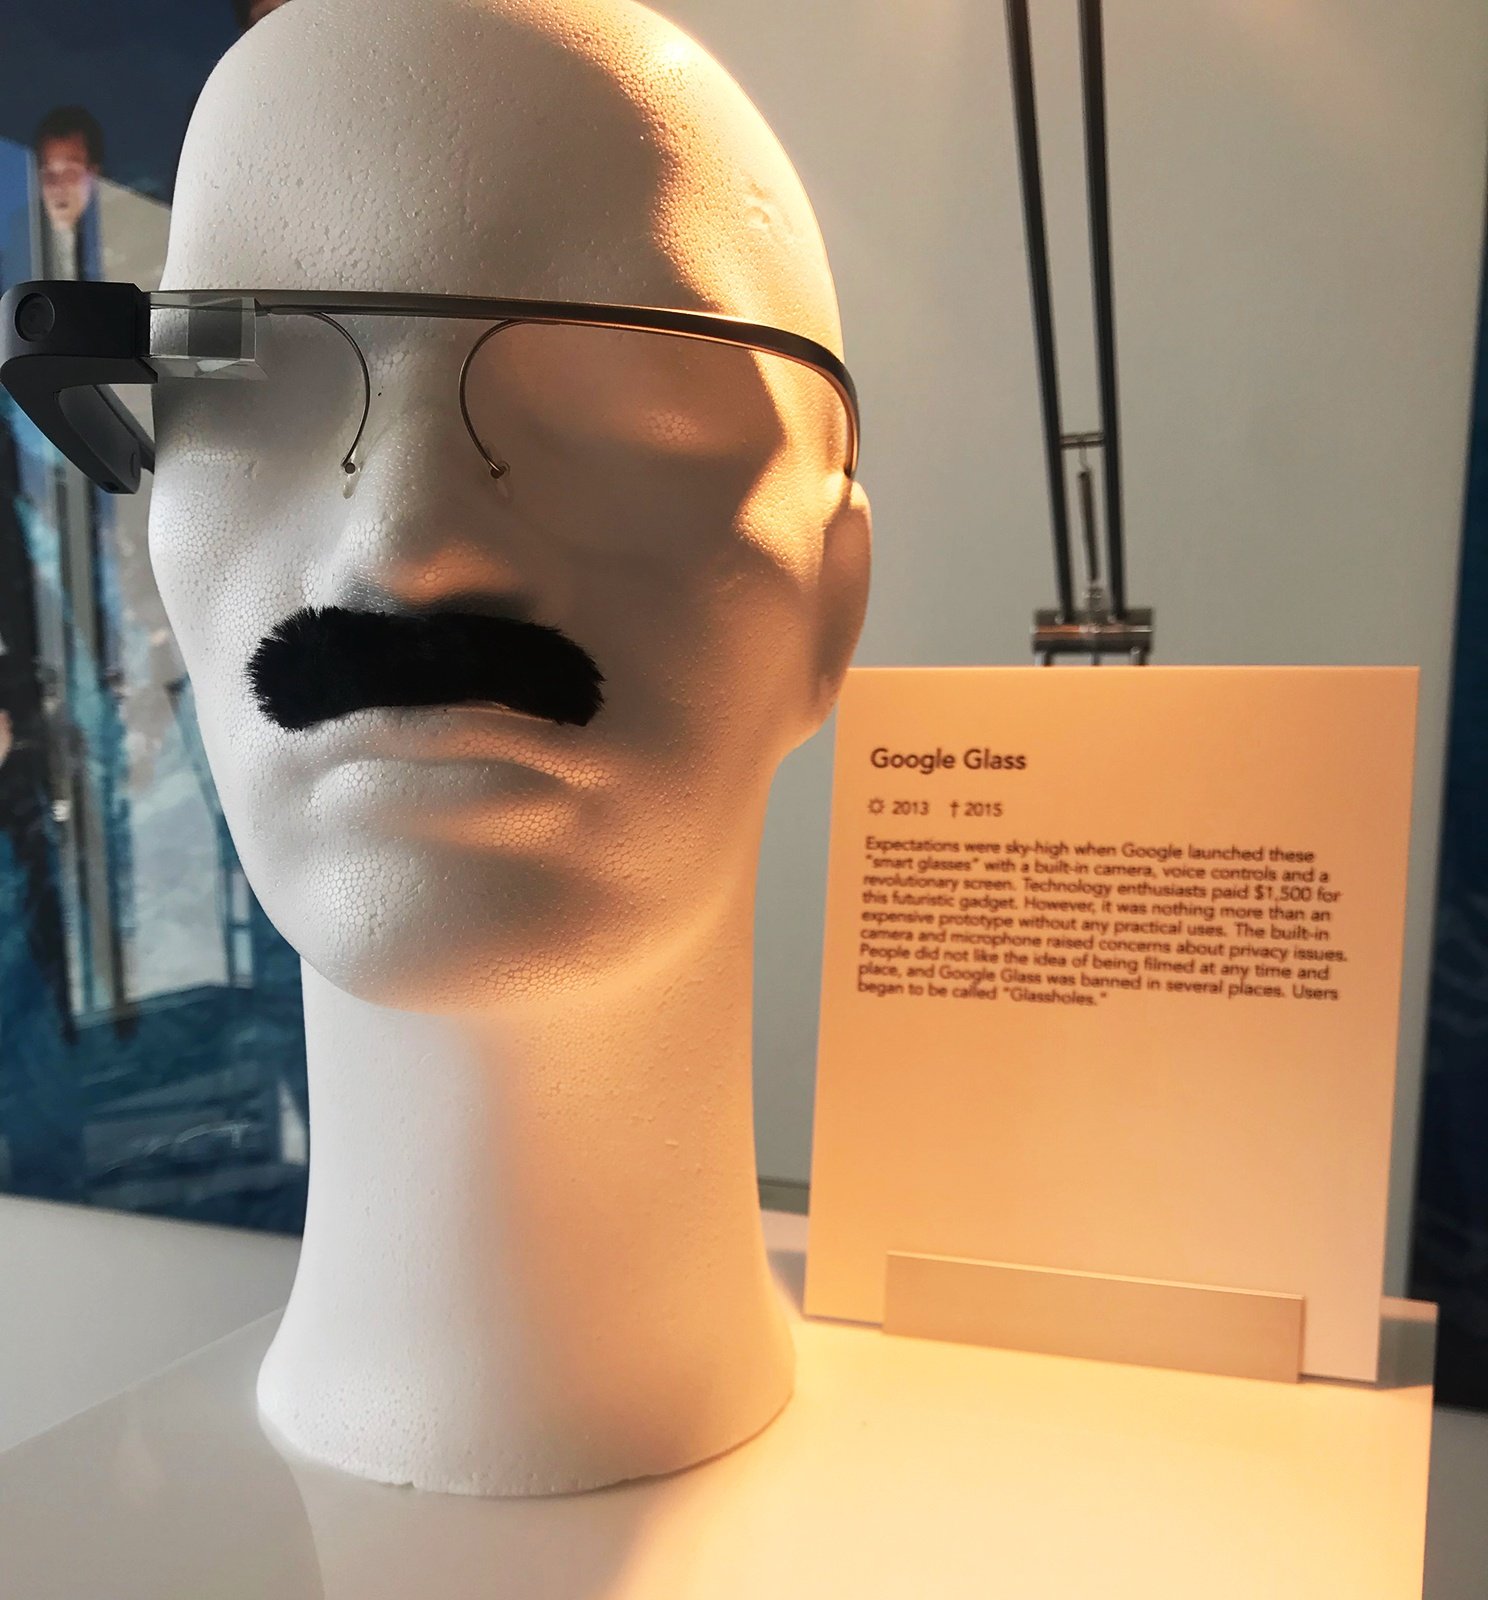 Poll: which is the bigger fail, Google Glass or the mustache?